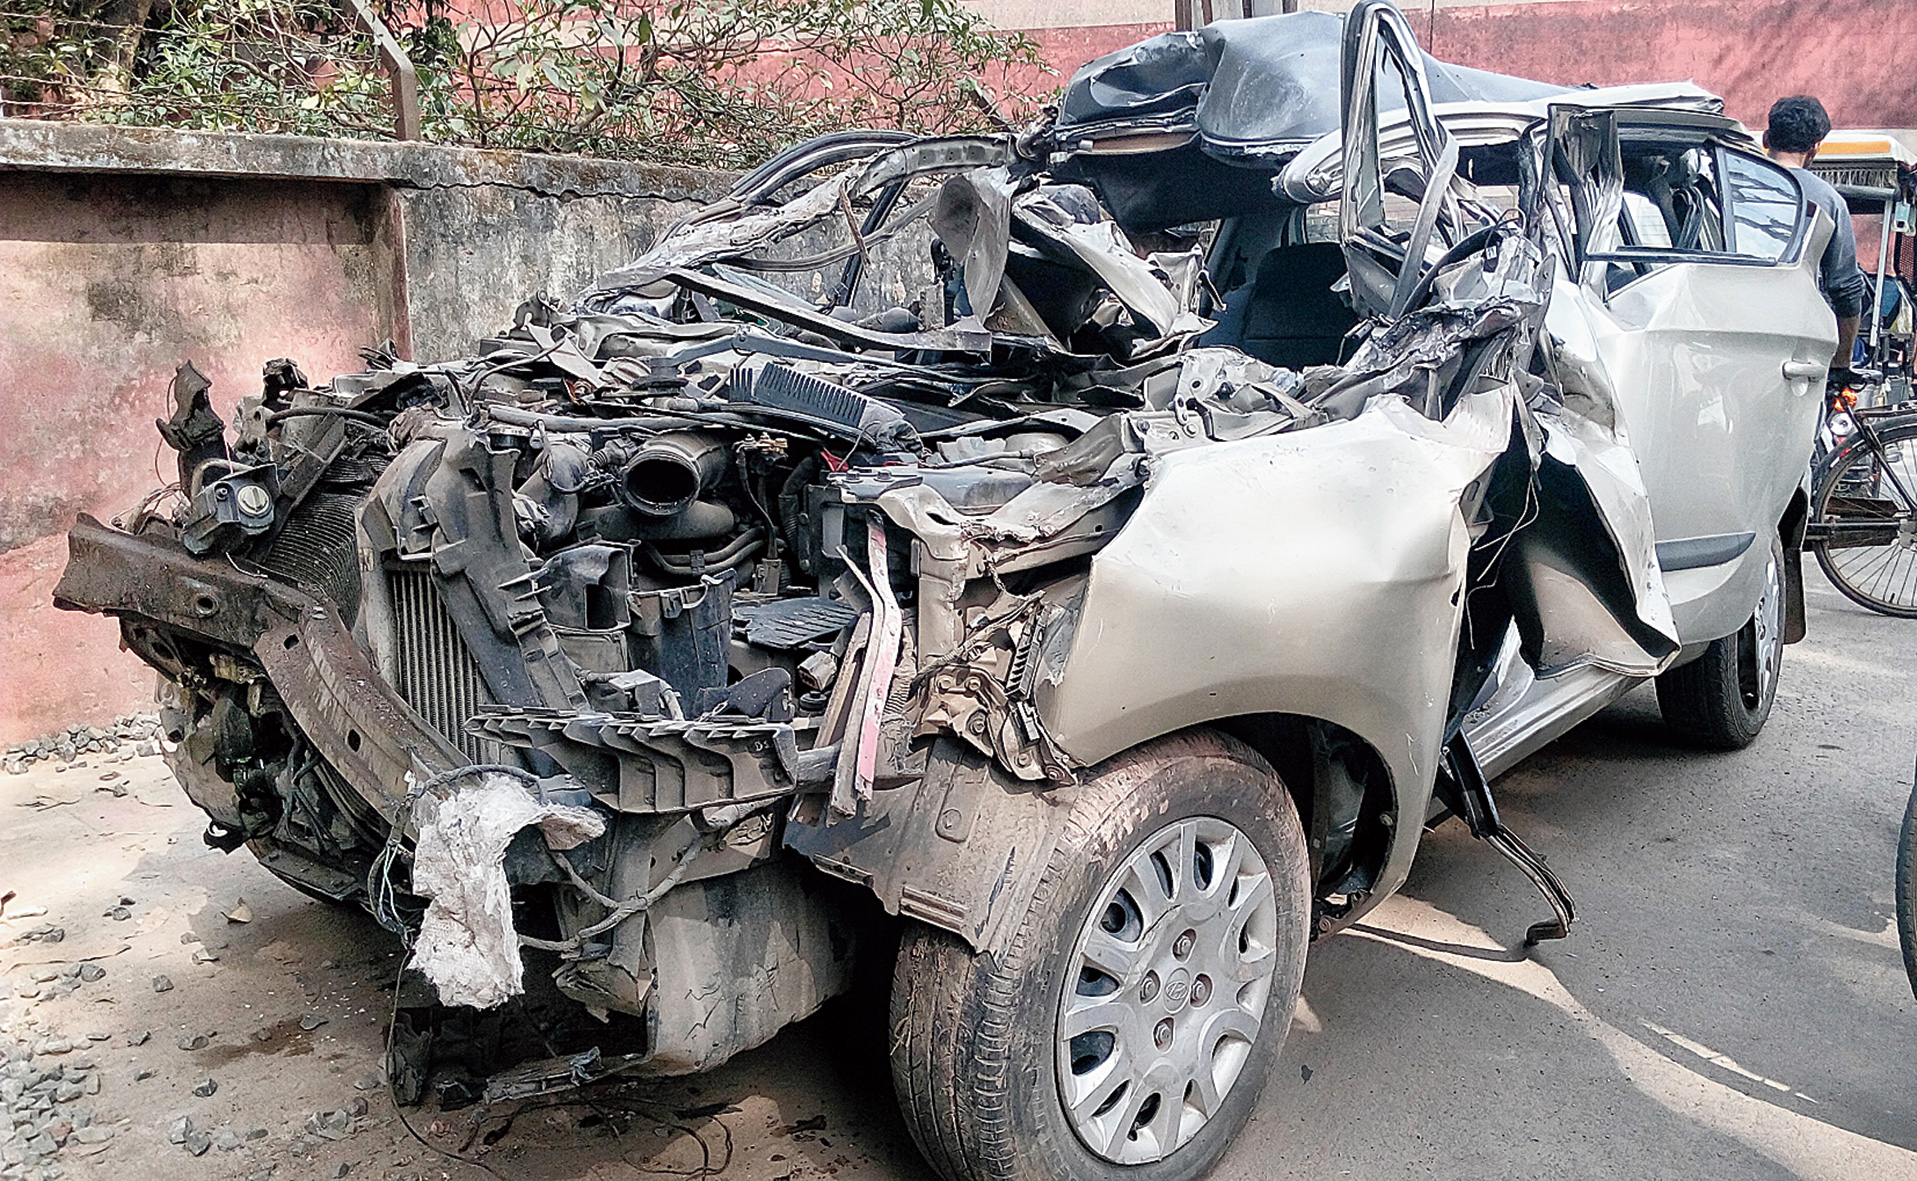 The mangled car in Ranaghat.